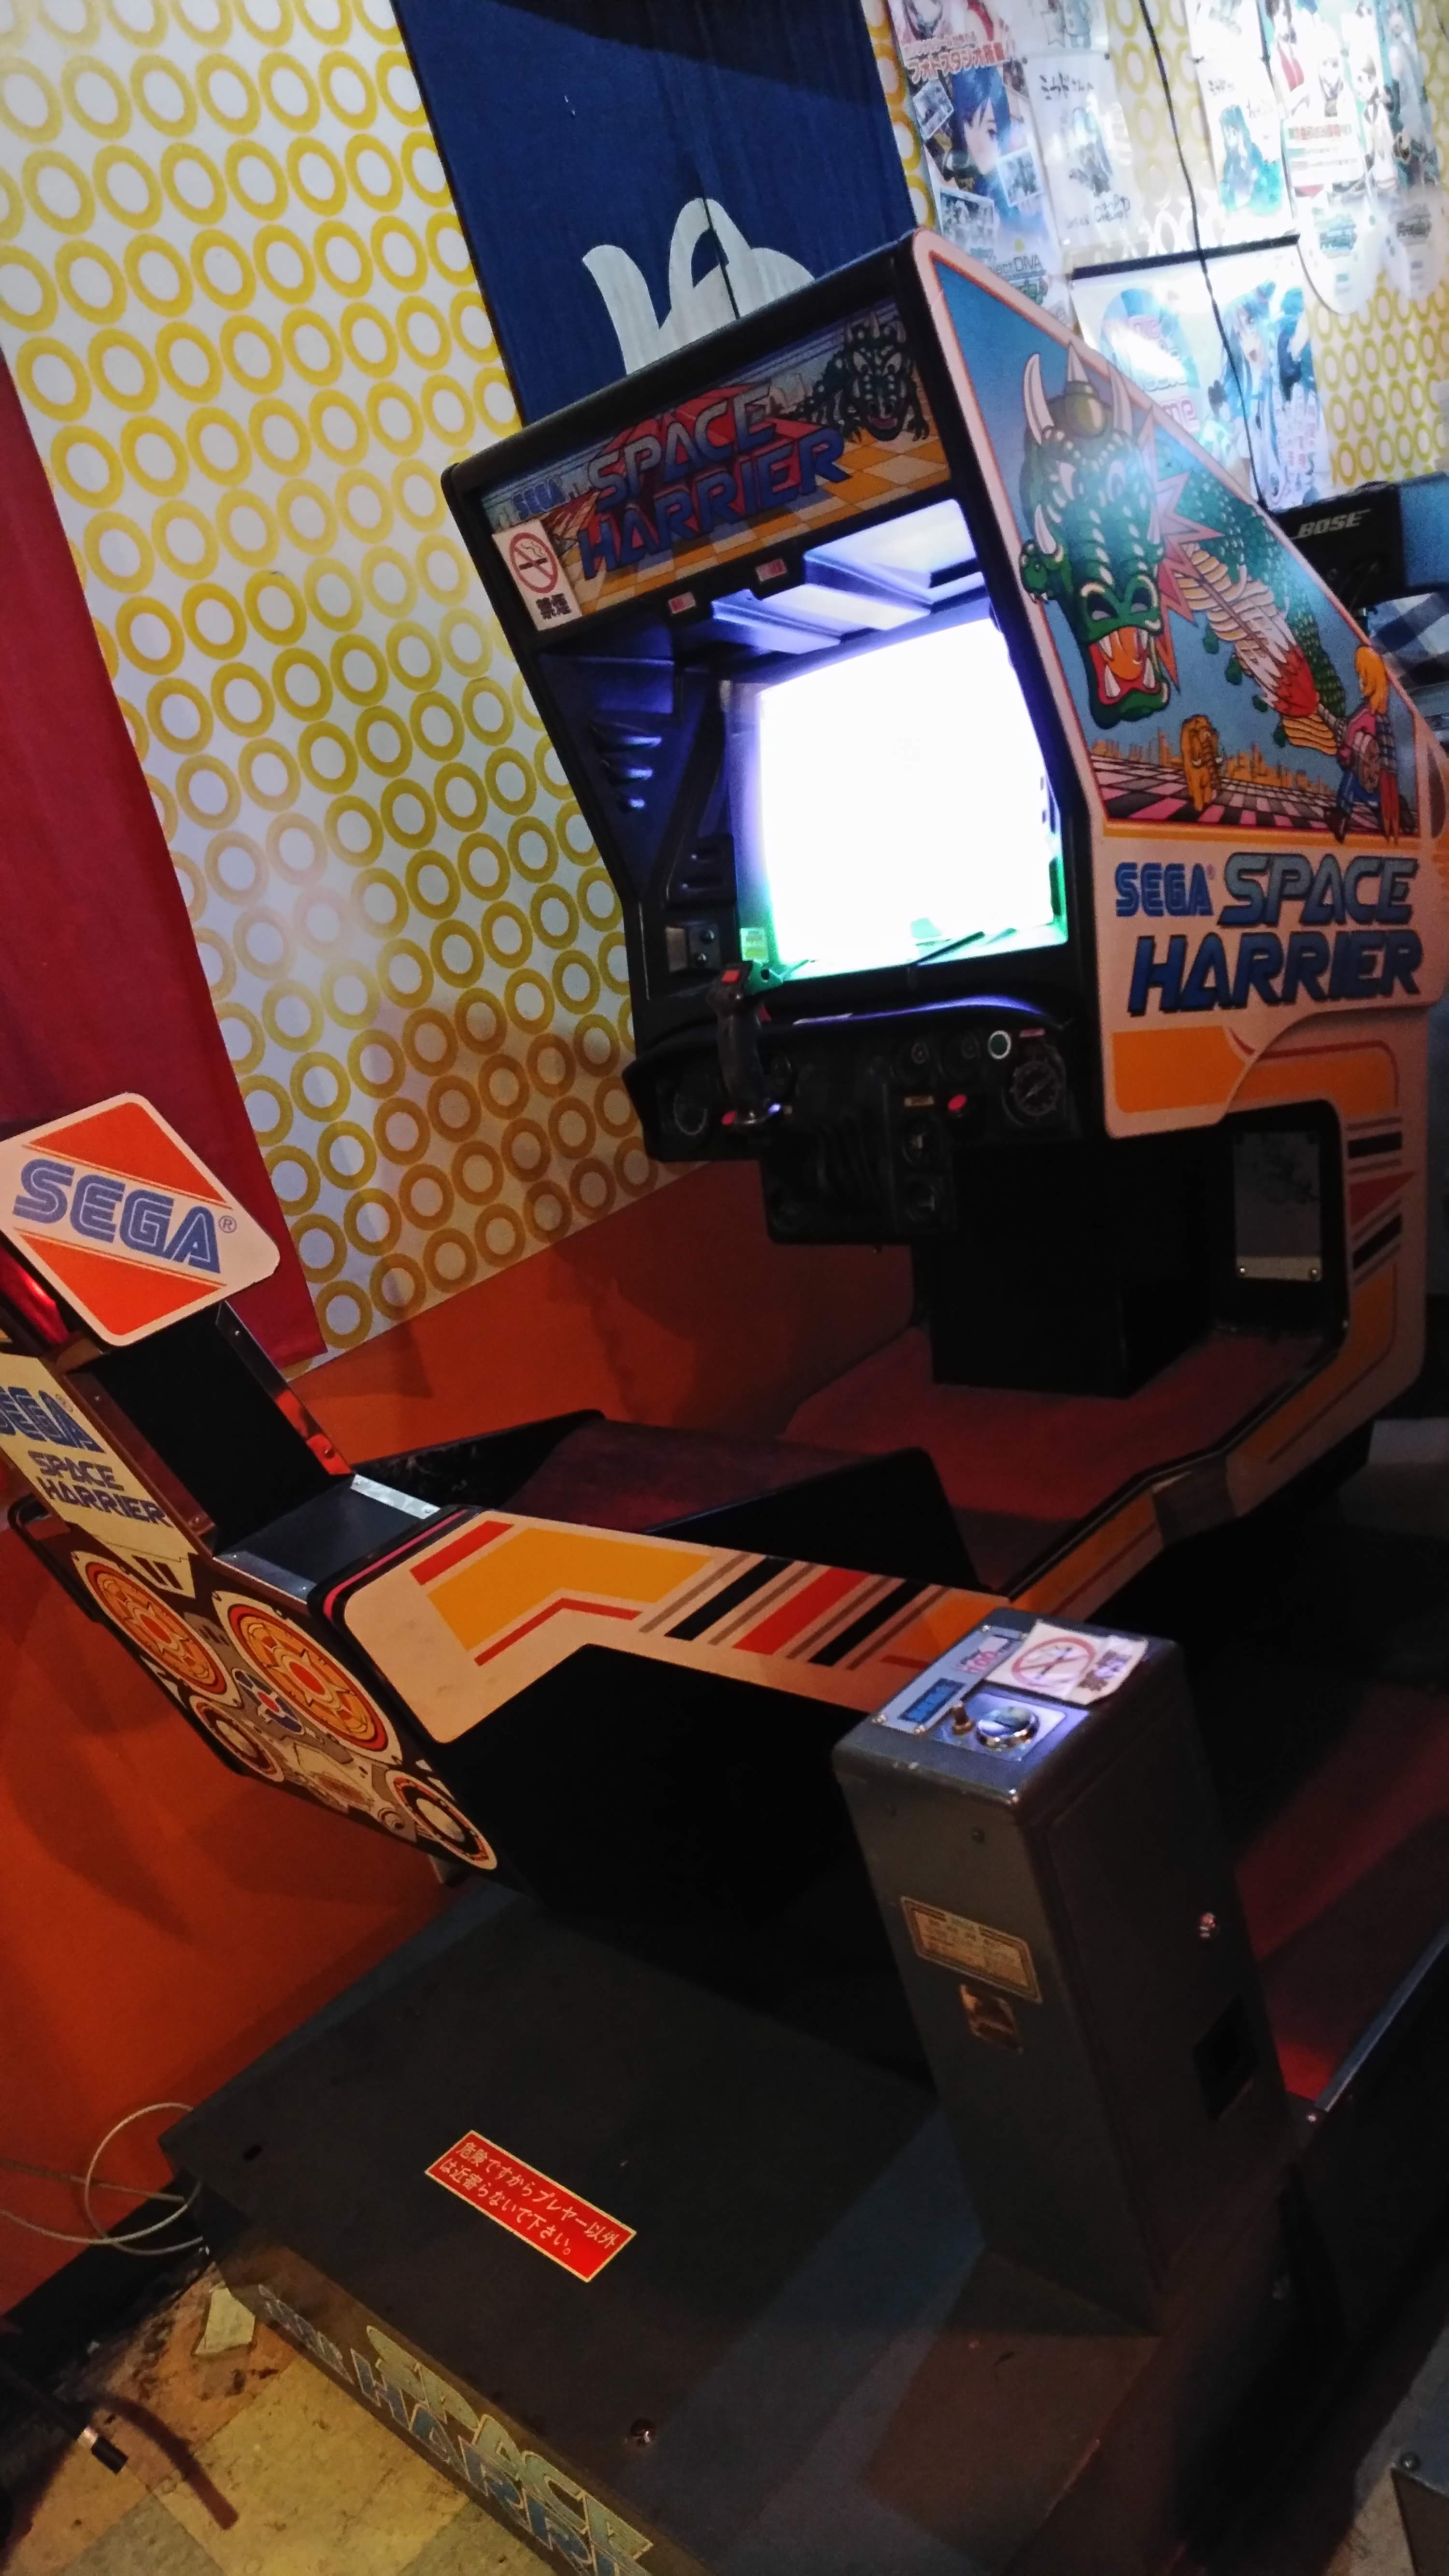 the cockpit version of space harrier